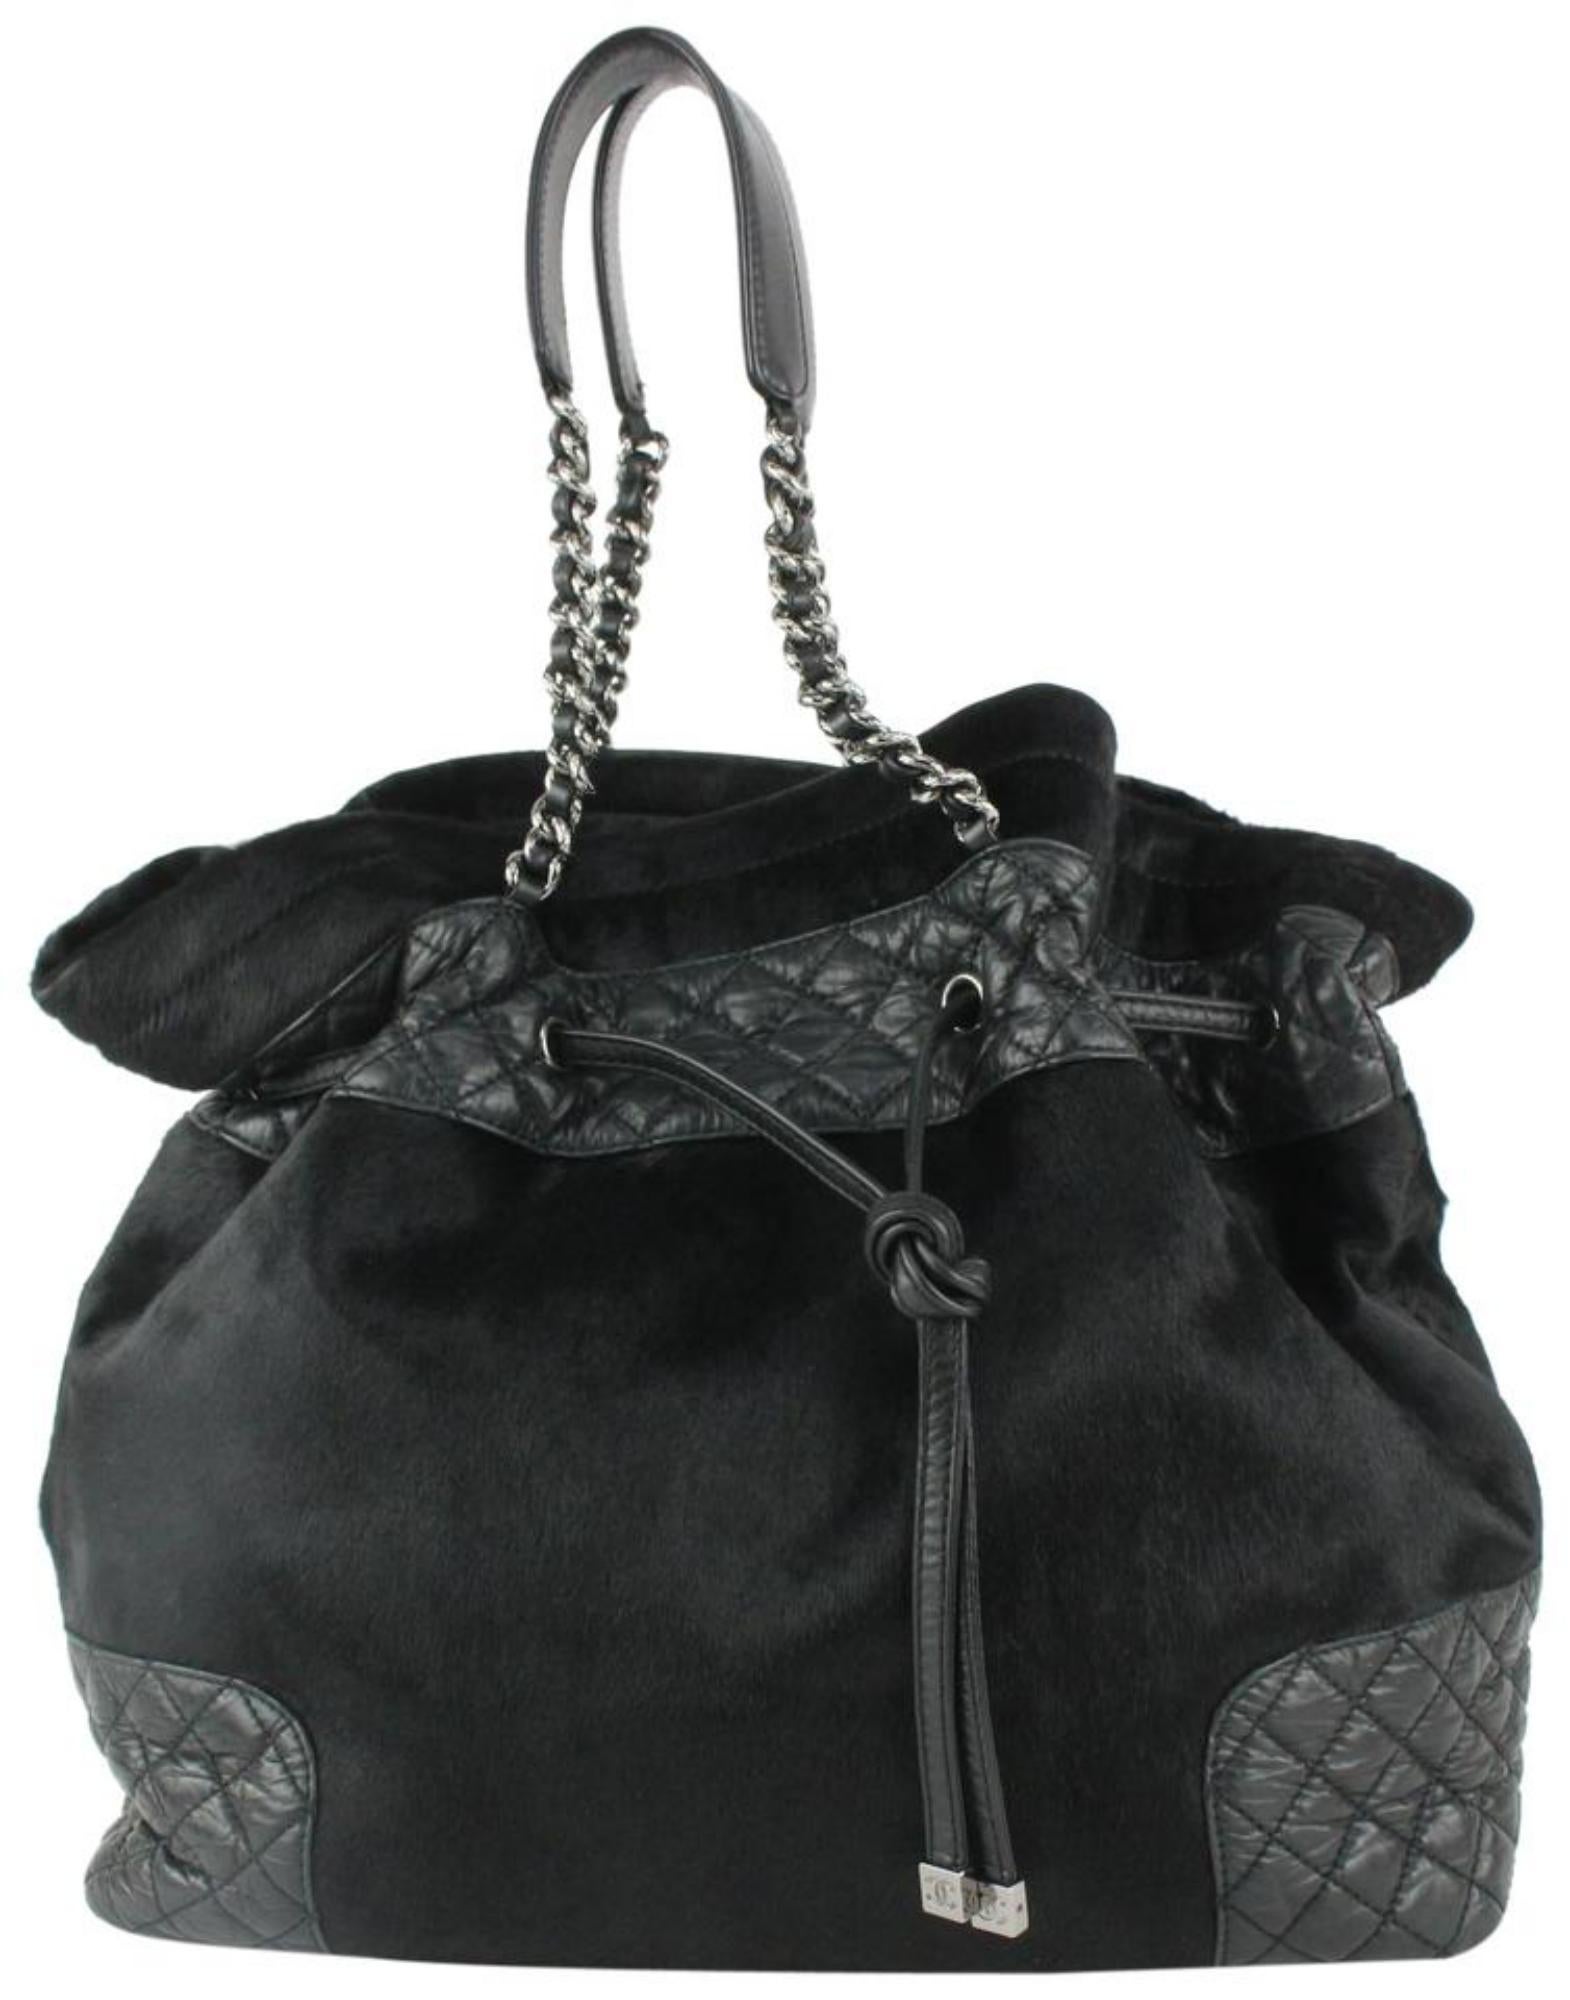 Chanel Black Quilted Lambskin x Pony Hair Drawstring Bucket Chain Hobo 1115c4 For Sale 8